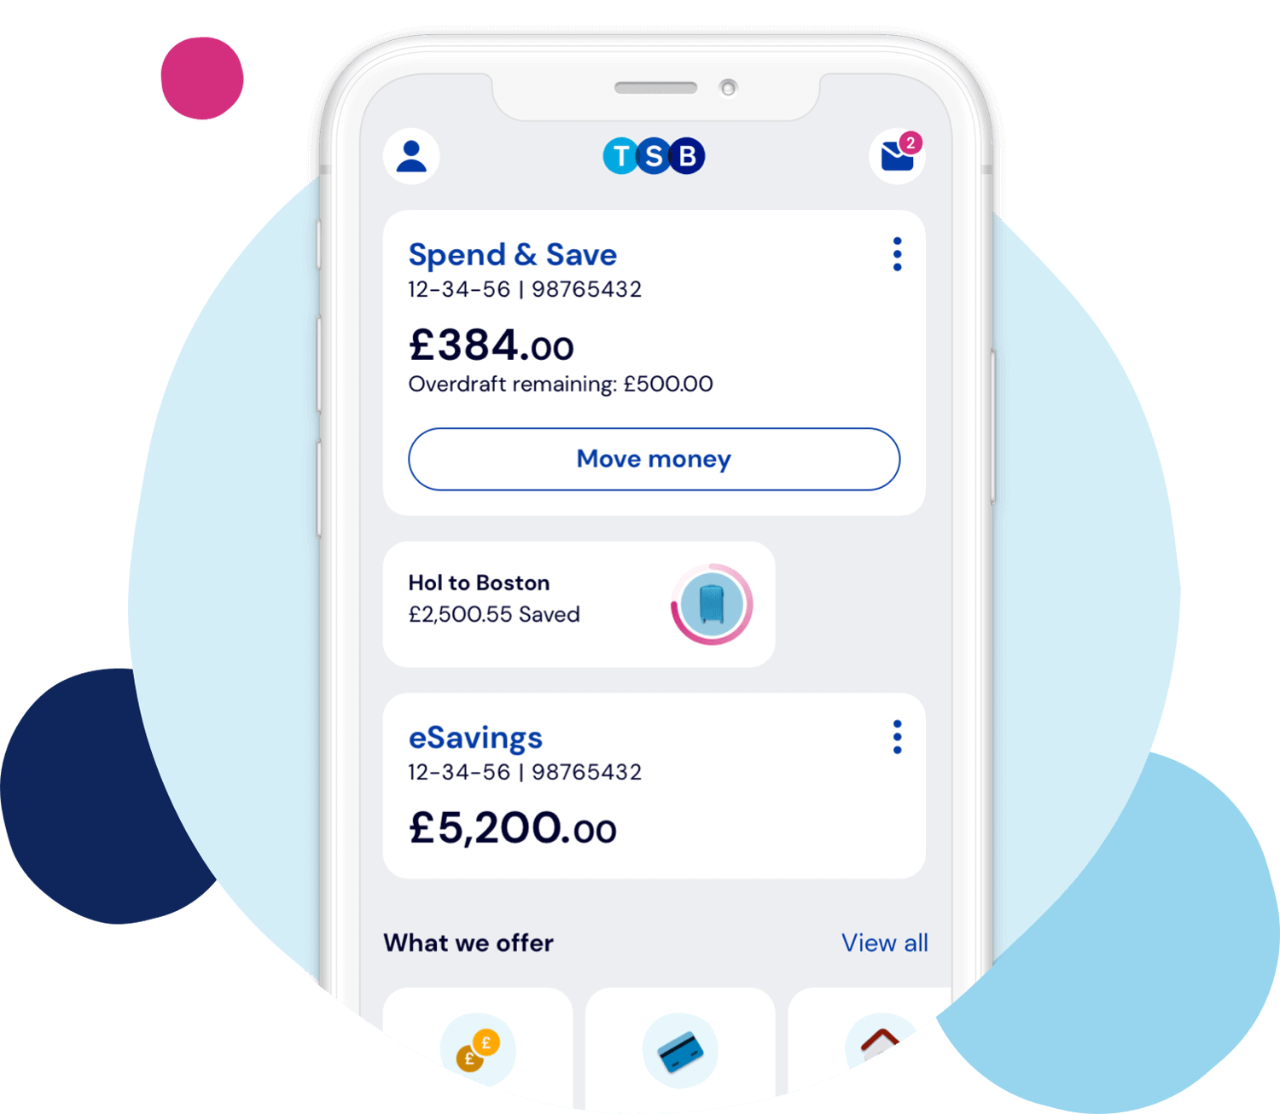 Smartphone displaying TSB Banking App with Spend & Save and eSavings accounts.